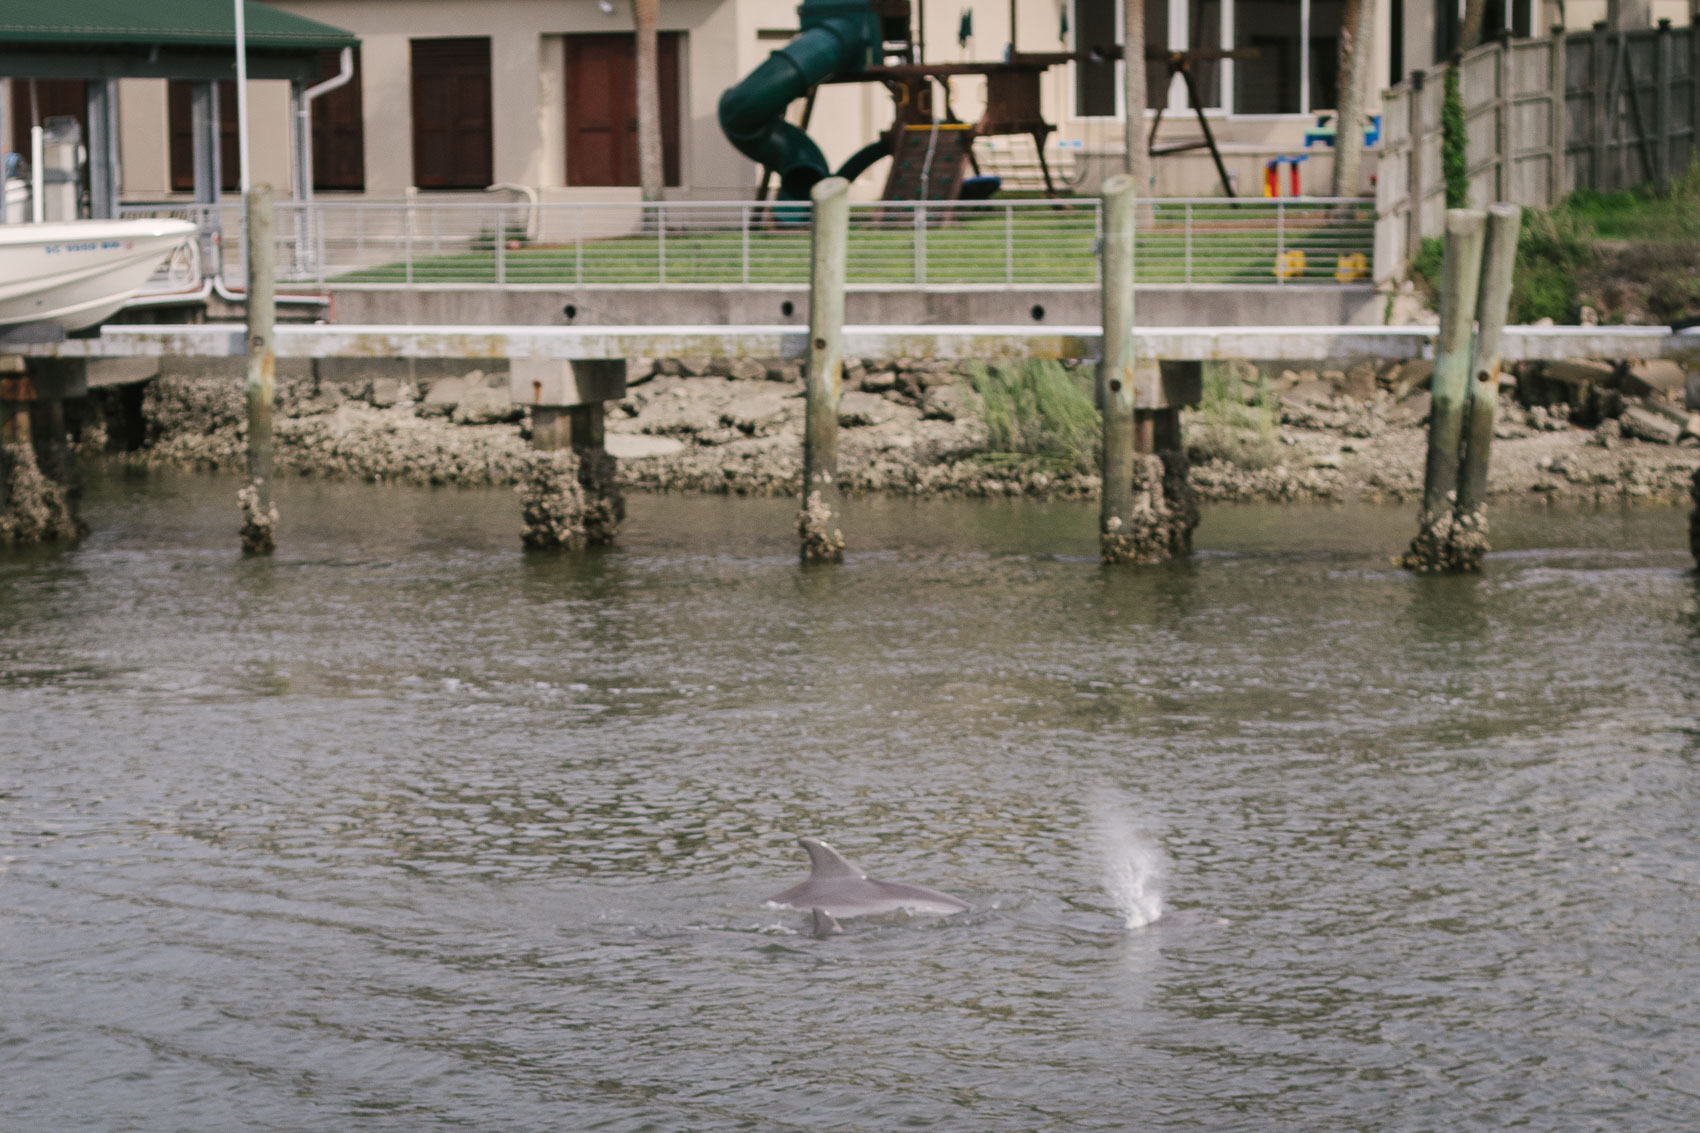 Things to Do in Mount Pleasant, SC: Dolphin Spotting at Shem Creek Park